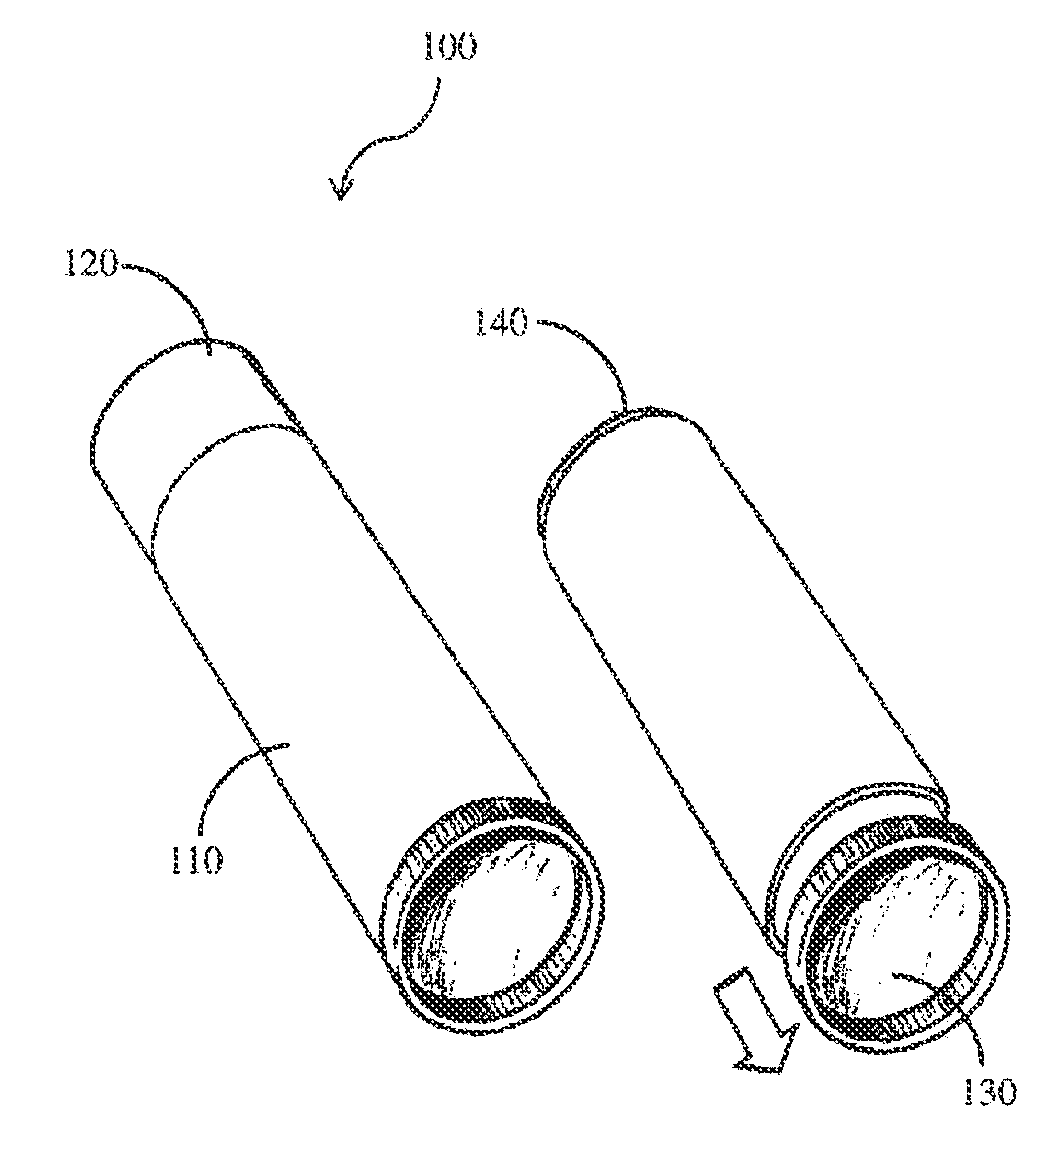 Compositions and methods for coating implant surfaces to inhibit surgical infections